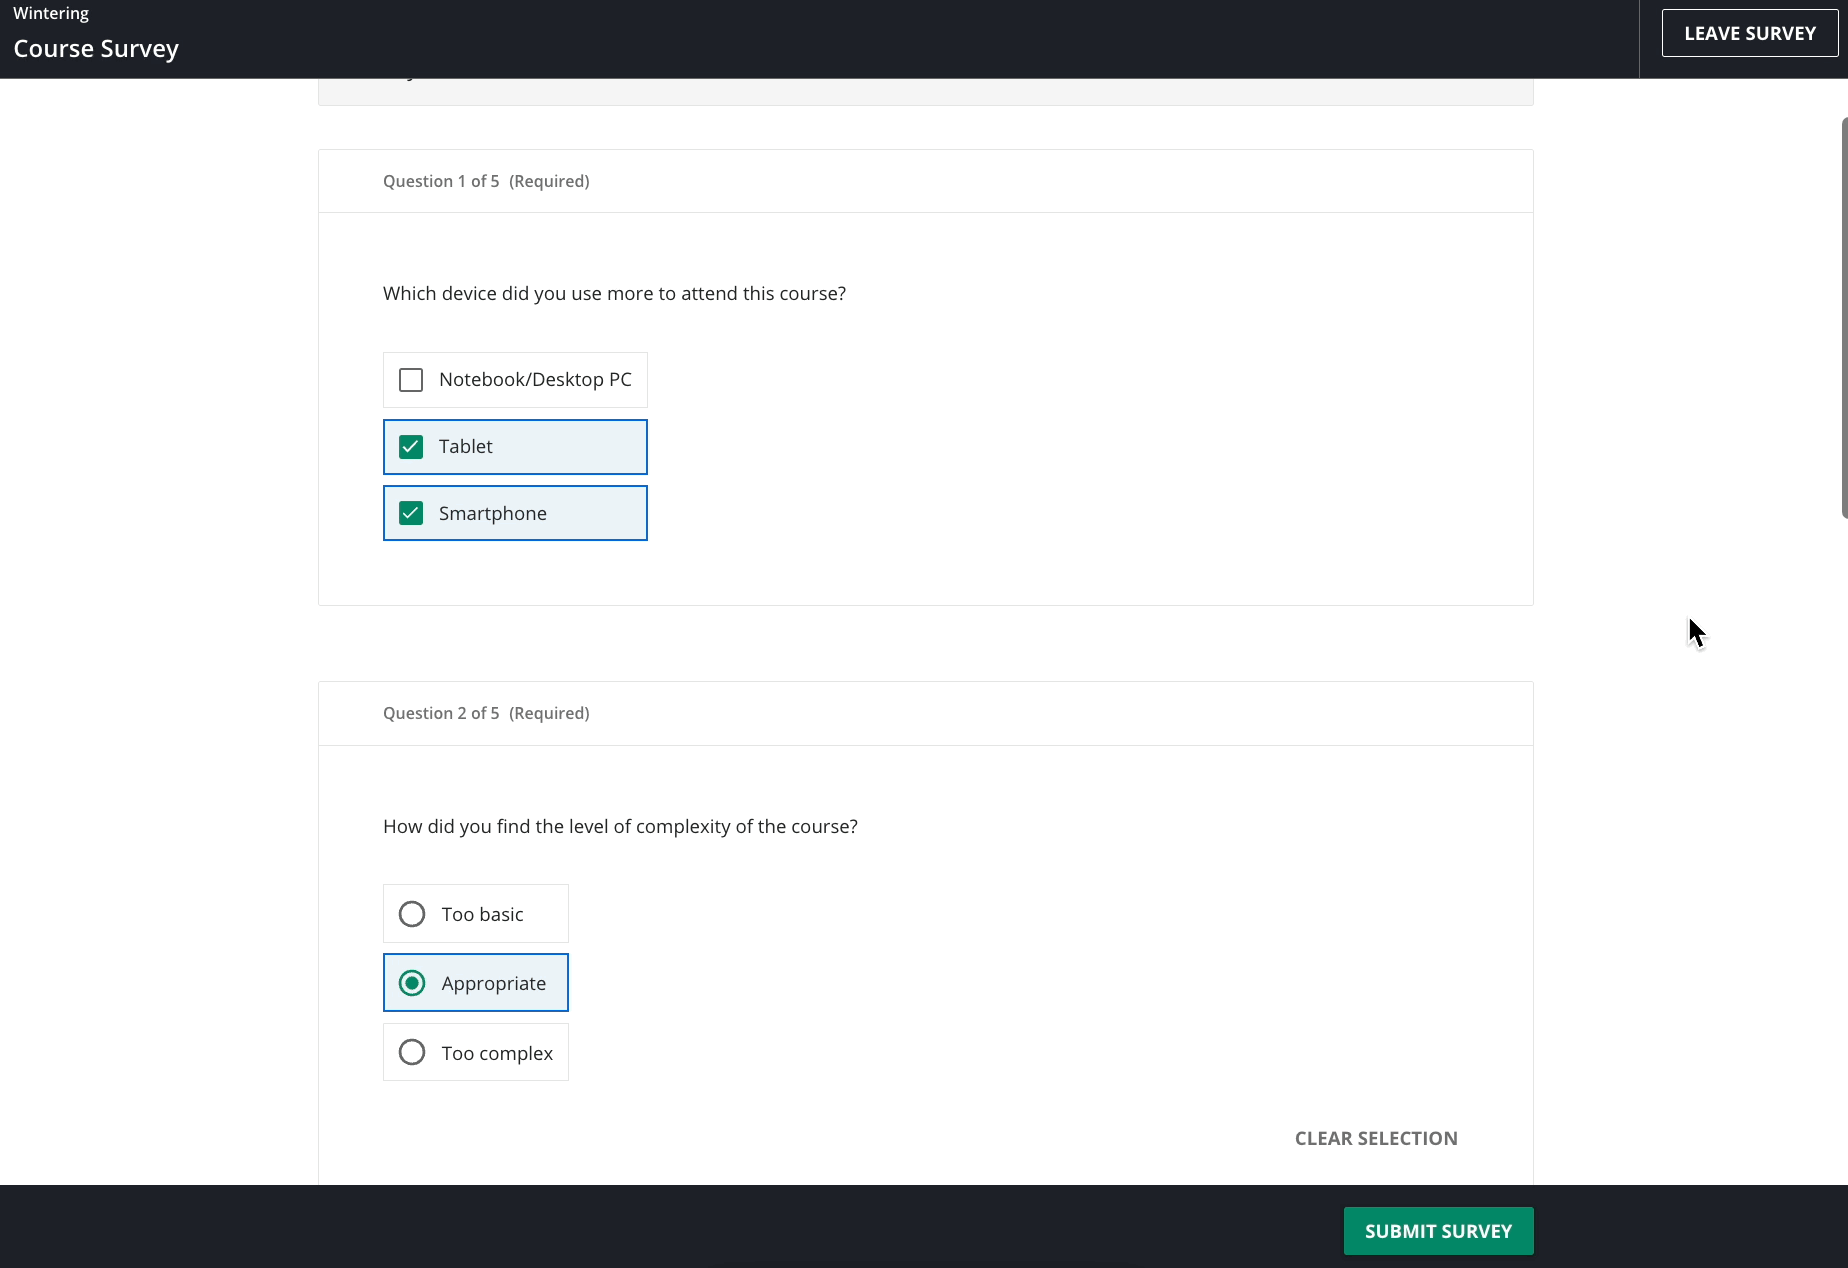 Submitting a survey